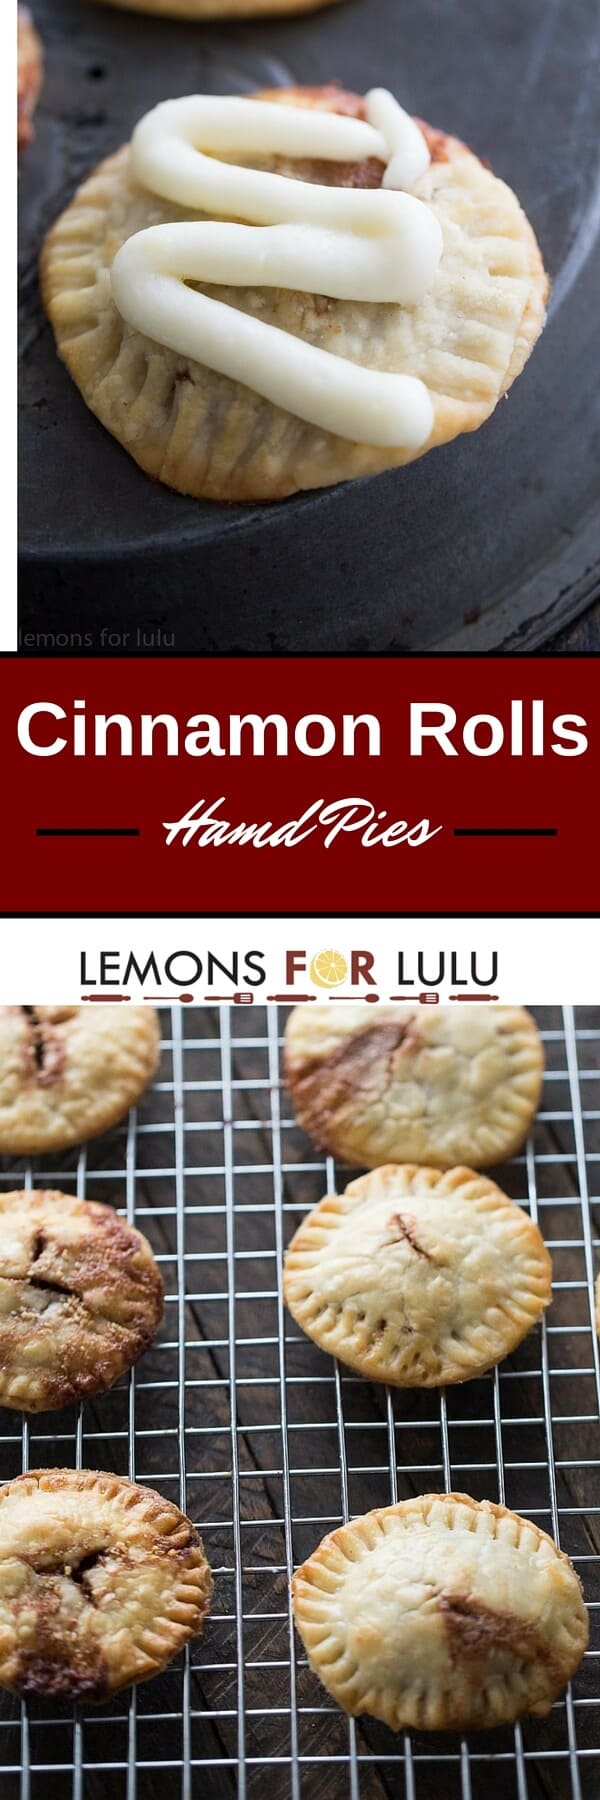 A quick and easy cinnamon rolls recipe that takes every day ingredients and turns them into portable hand pies bursting with cinnamon roll flavor!